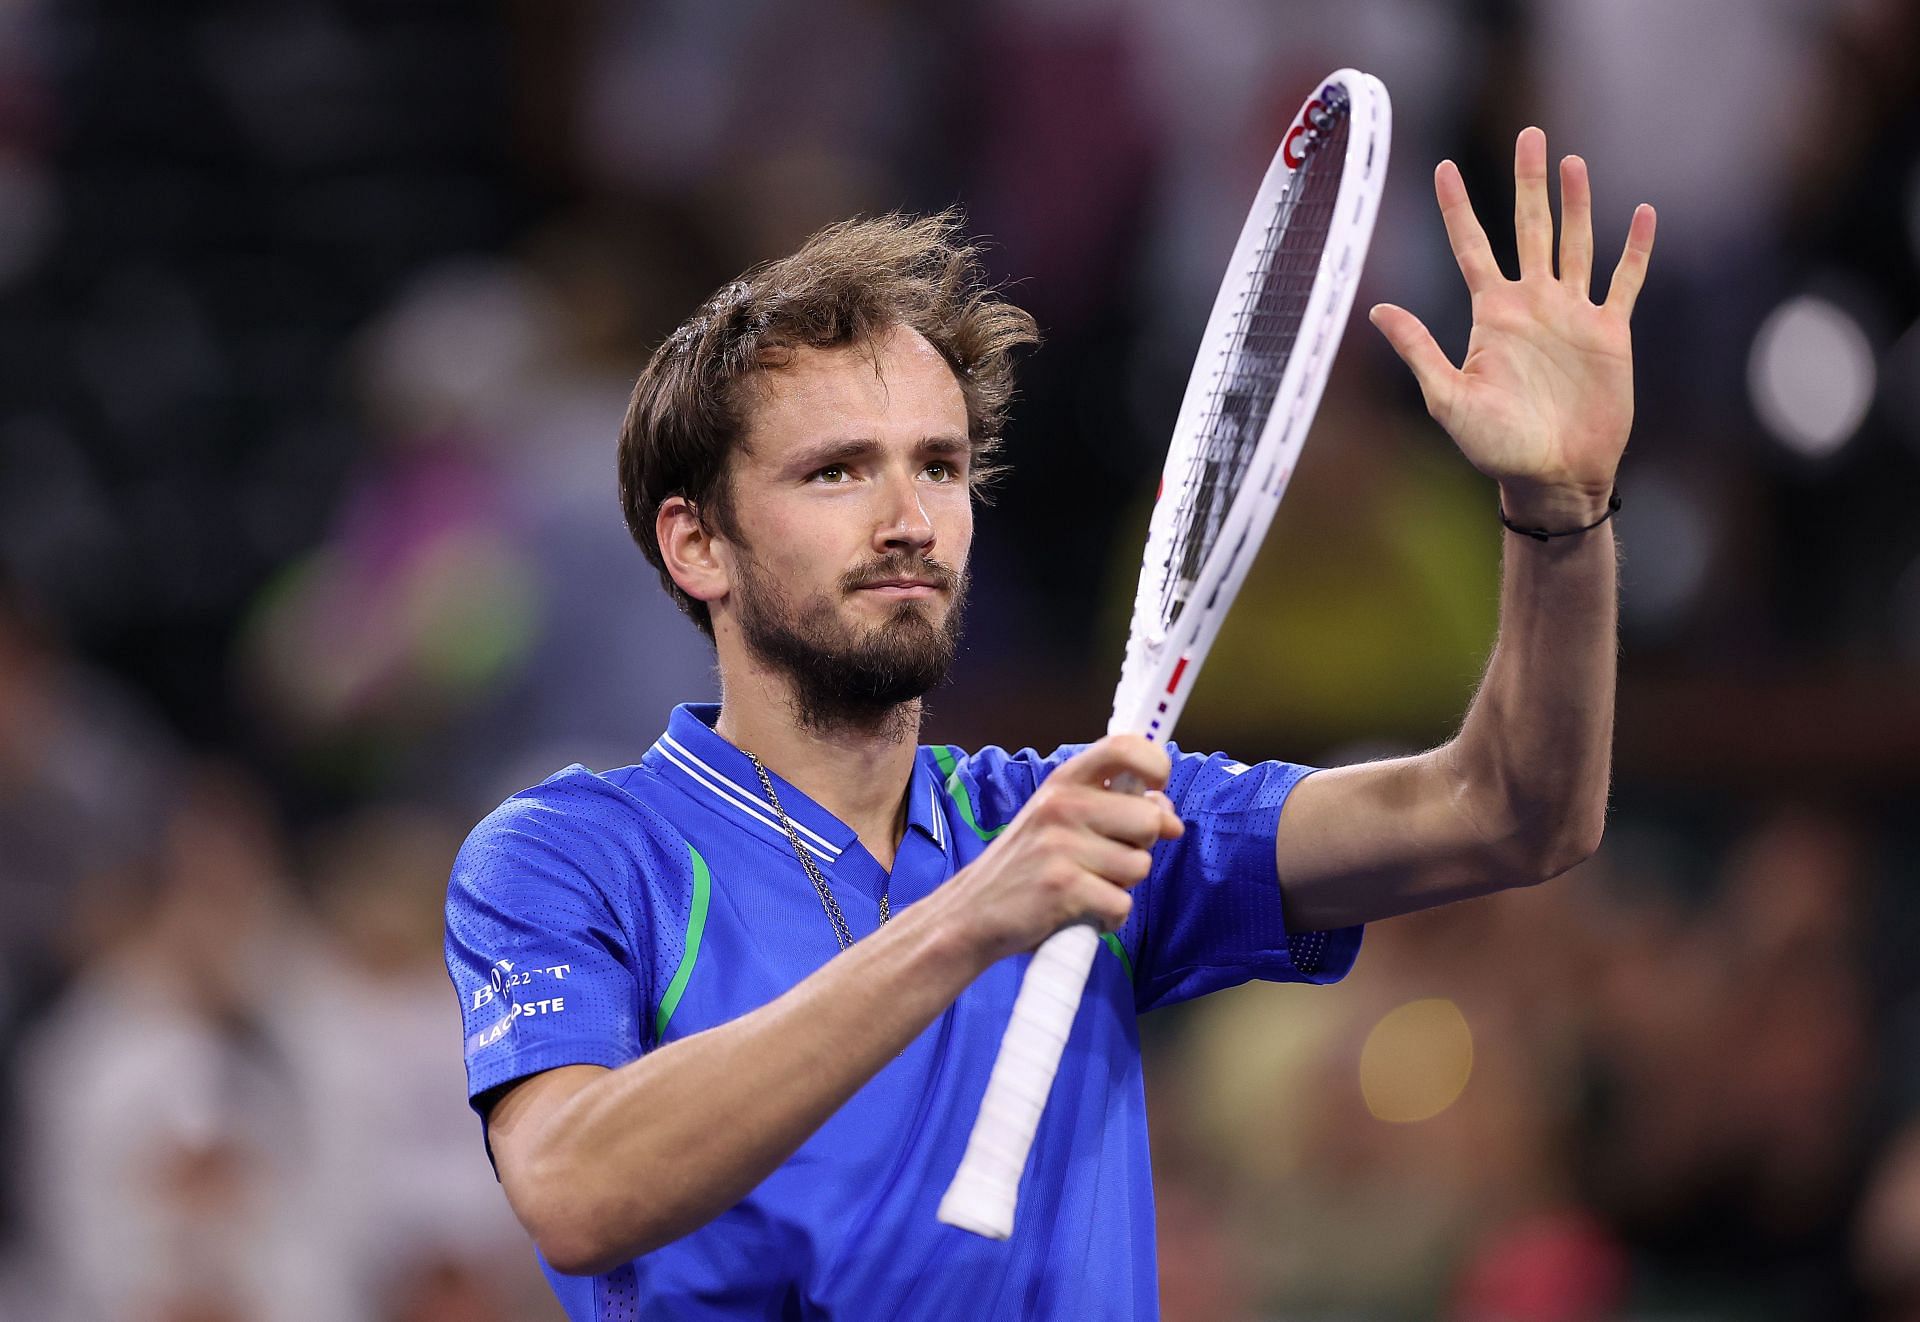 Daniil Medvedev is currently on a three-tournament win streak, which is at risk now